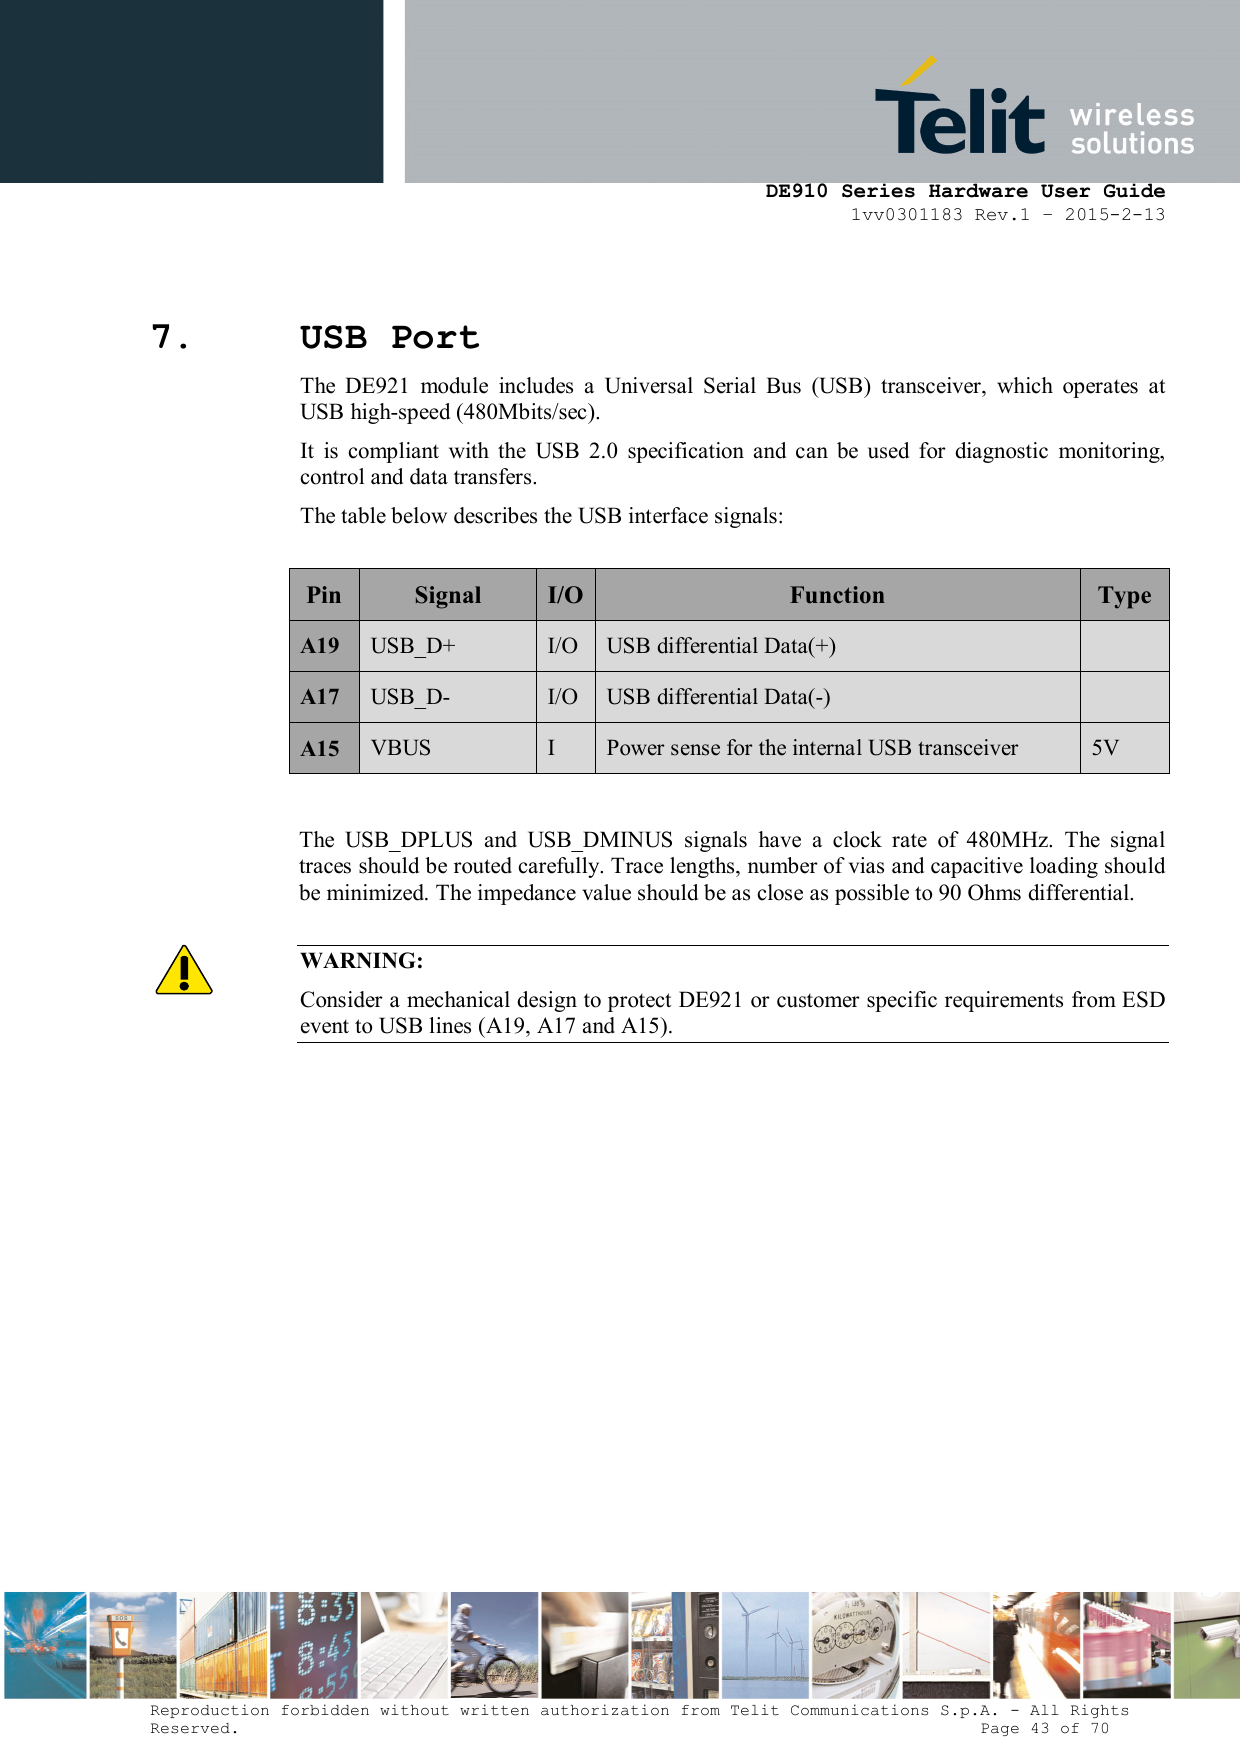      DE910 Series Hardware User Guide 1vv0301183 Rev.1 – 2015-2-13 Reproduction forbidden without written authorization from Telit Communications S.p.A. - All Rights Reserved.                                                                          Page 43 of 70 7. USB Port The  DE921  module  includes  a  Universal  Serial  Bus  (USB)  transceiver,  which  operates  at USB high-speed (480Mbits/sec).  It  is  compliant  with  the  USB  2.0  specification  and  can  be  used  for  diagnostic  monitoring, control and data transfers. The table below describes the USB interface signals:                          Pin Signal  I/O Function  Type A19 USB_D+  I/O USB differential Data(+)   A17 USB_D-  I/O USB differential Data(-)   A15  VBUS  I  Power sense for the internal USB transceiver  5V   The  USB_DPLUS  and  USB_DMINUS  signals  have  a  clock  rate  of  480MHz.  The  signal traces should be routed carefully. Trace lengths, number of vias and capacitive loading should be minimized. The impedance value should be as close as possible to 90 Ohms differential.  WARNING: Consider a mechanical design to protect DE921 or customer specific requirements from ESD event to USB lines (A19, A17 and A15).          